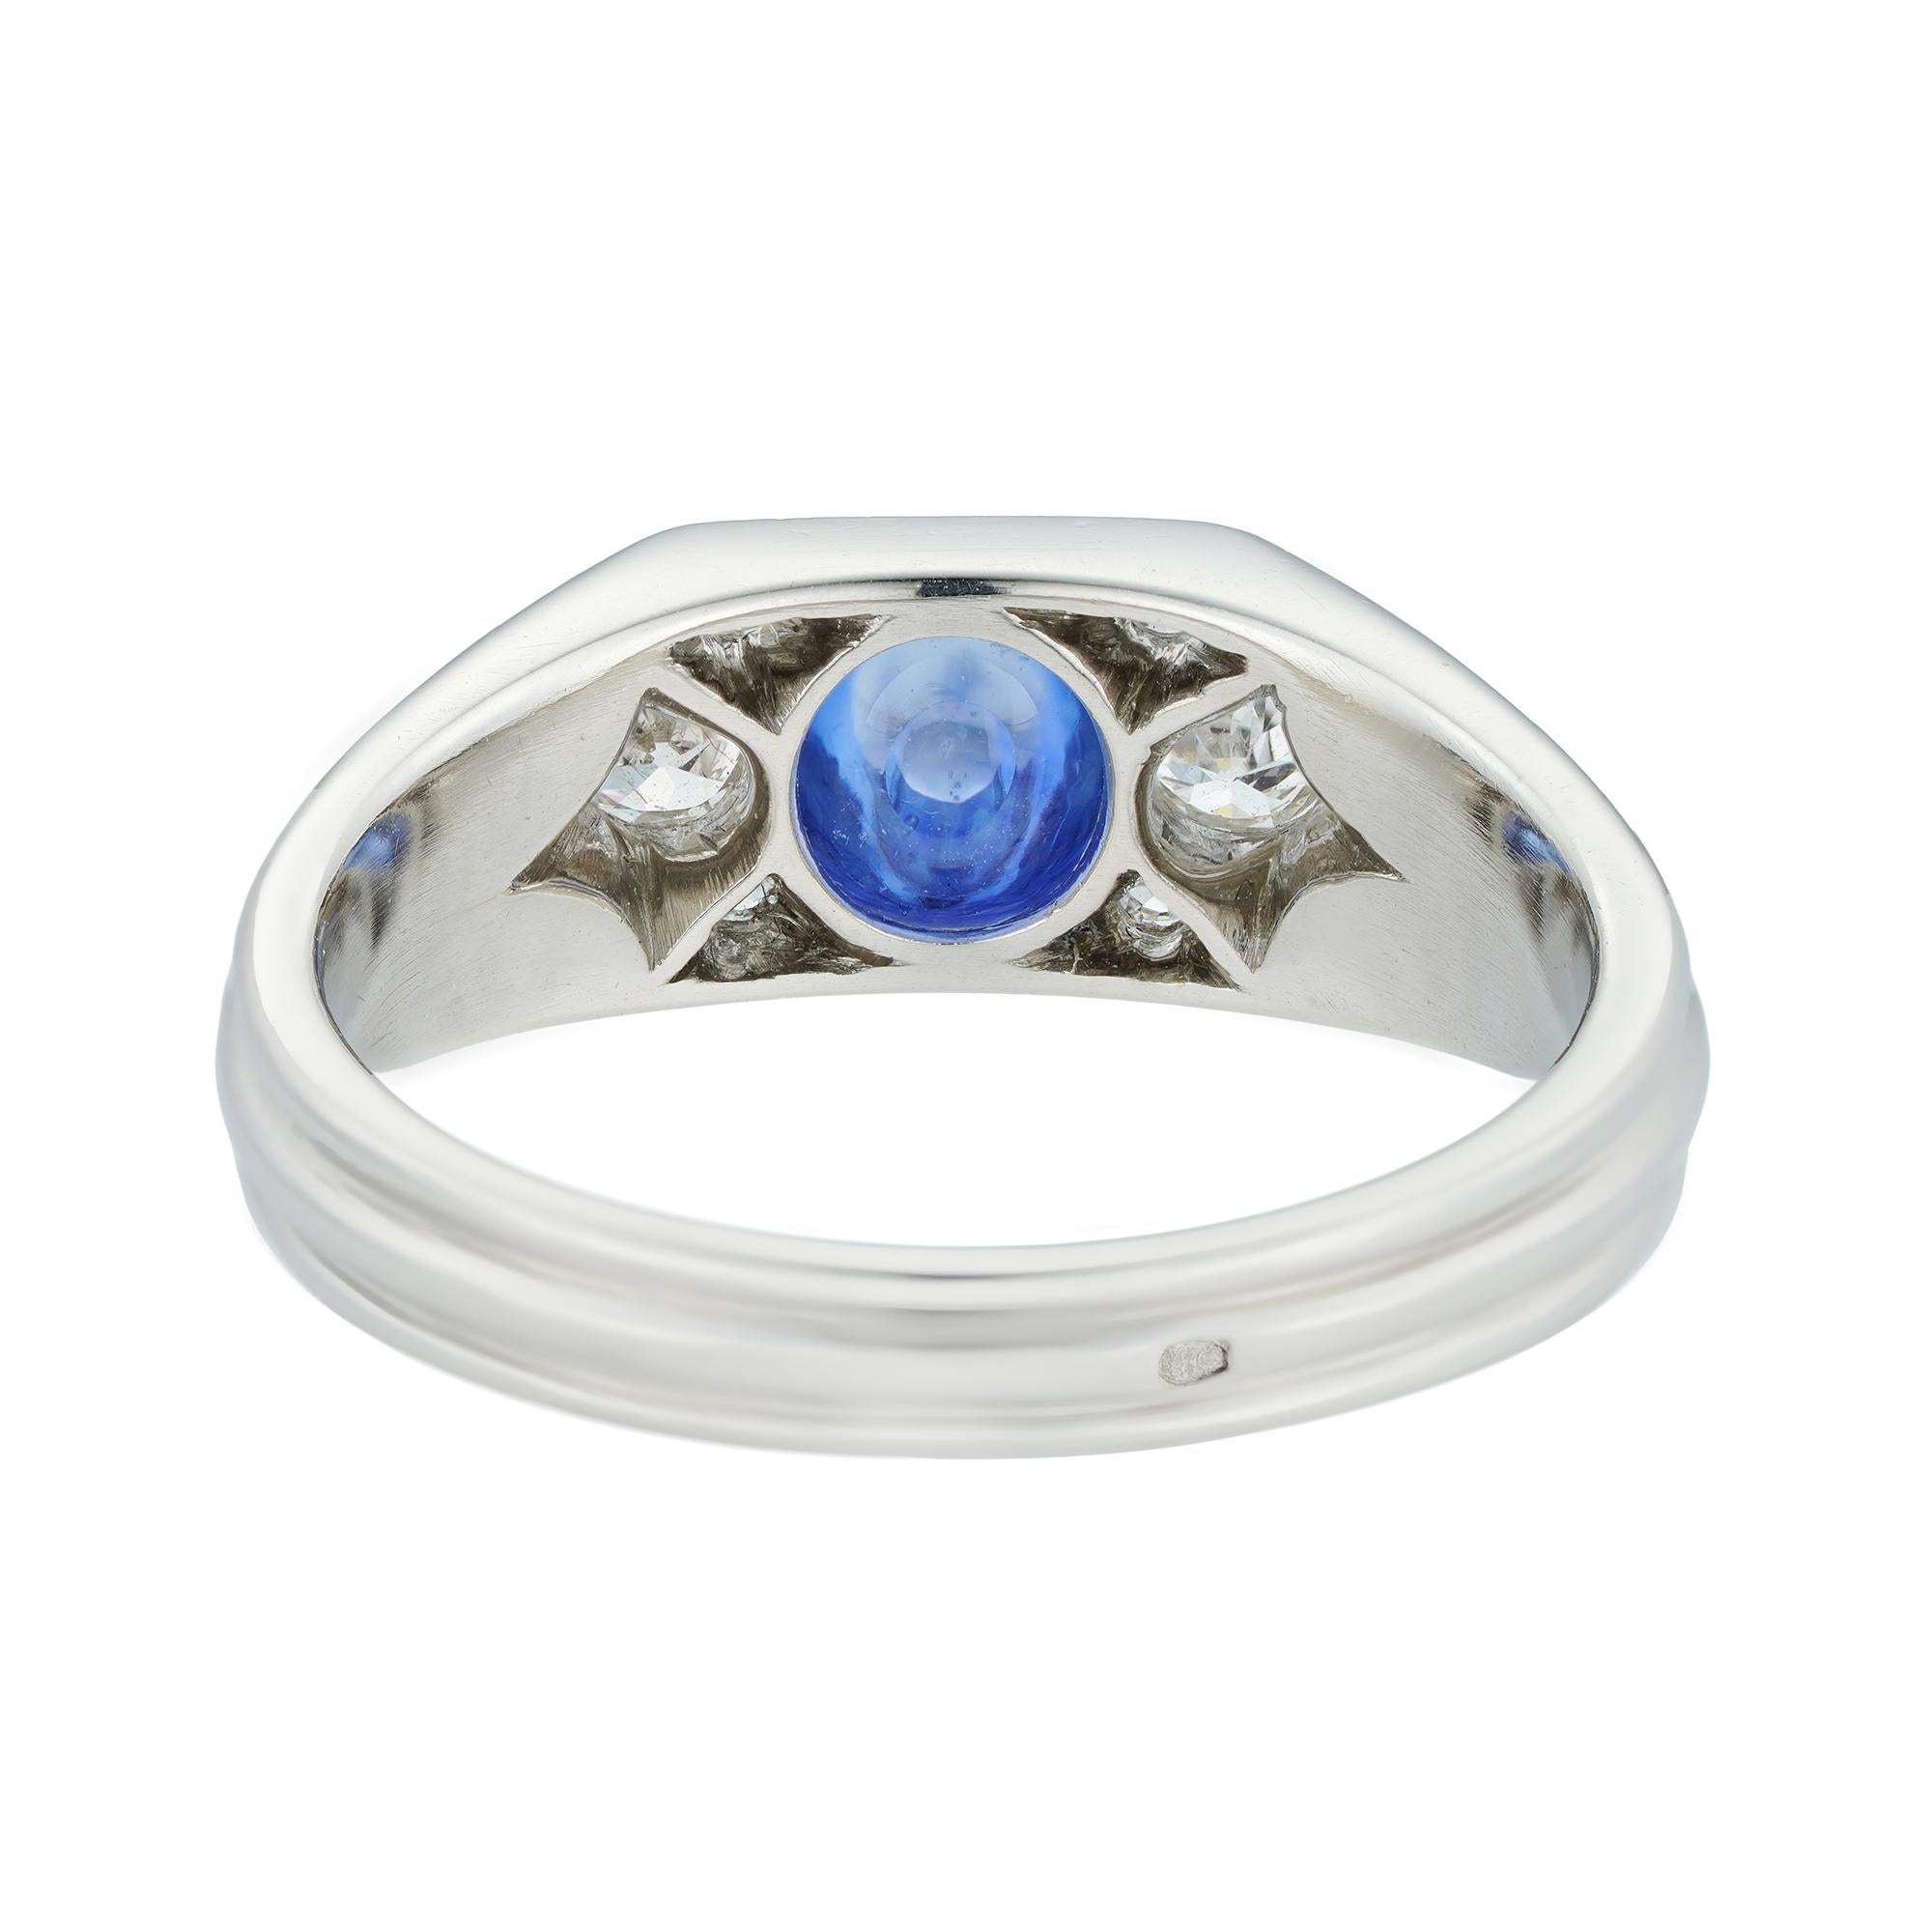 Women's or Men's An Art Deco Sapphire And Diamond Ring For Sale